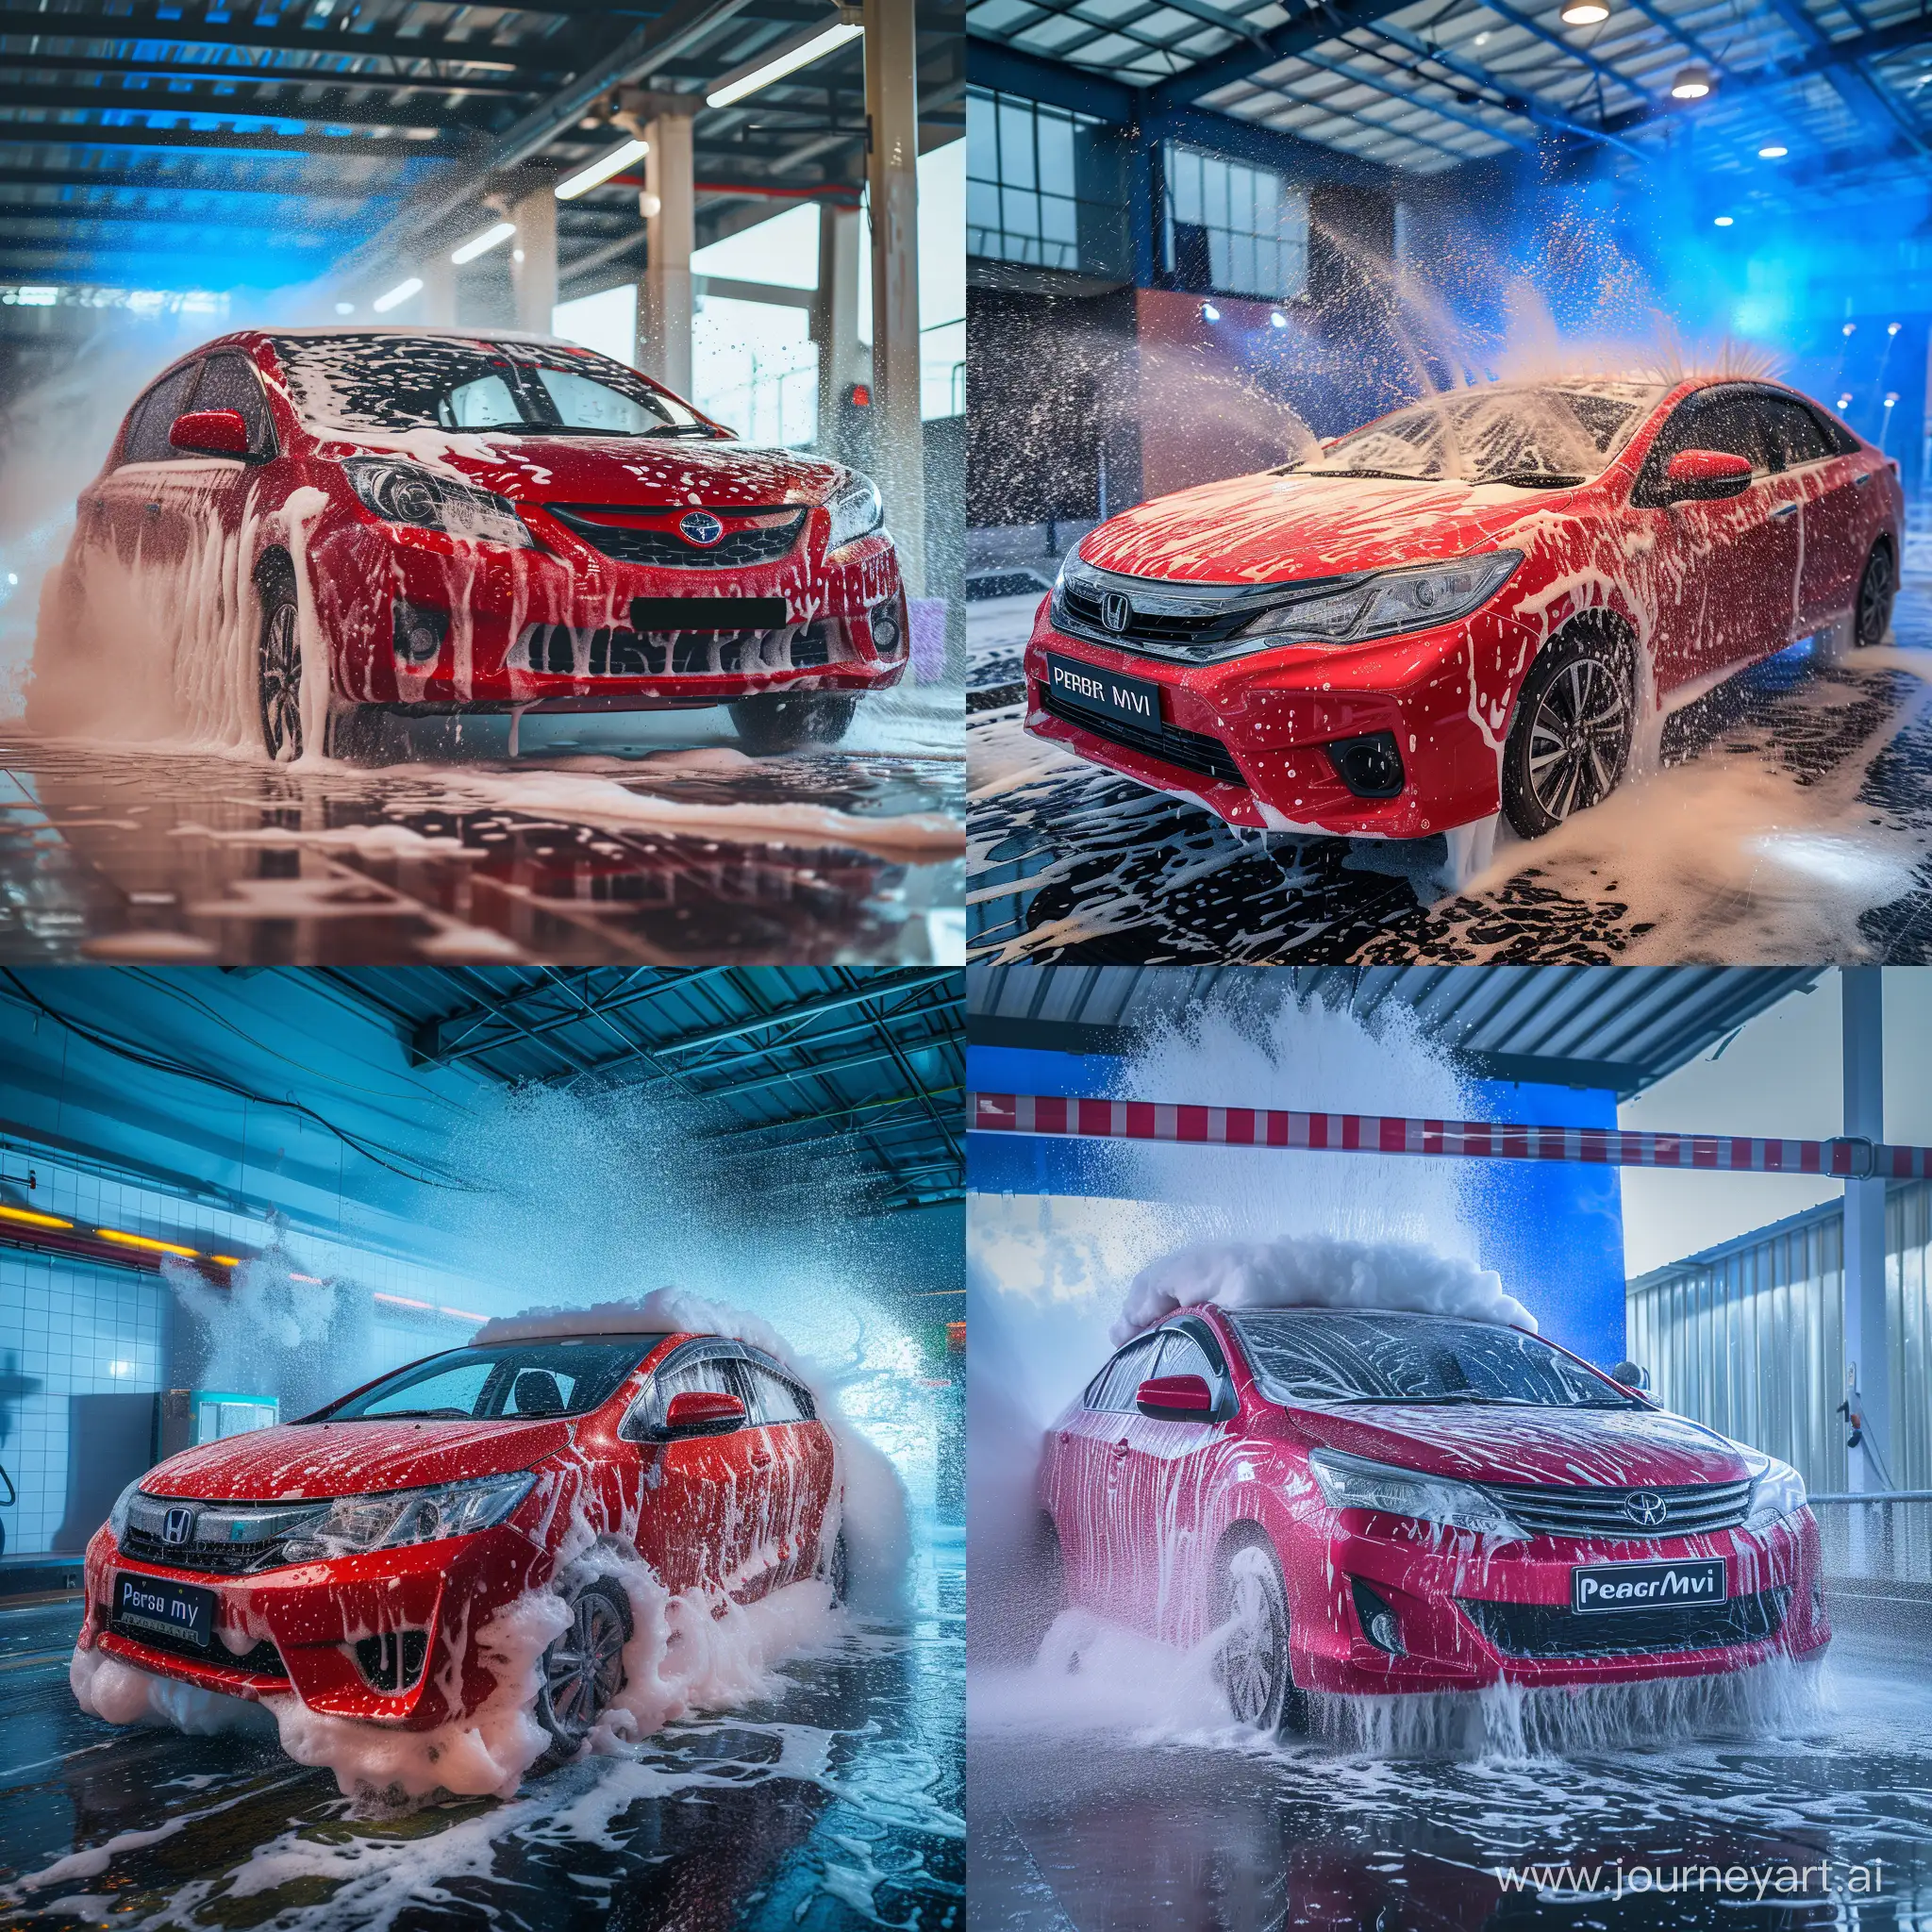 Ultra realistic,a red Perodua Myvi car that is being washed at the carwash. There is a lot of foam and water spray. a modern carwash. there is a blue light behind. canon eos-id x mark iii dslr --v 6.0